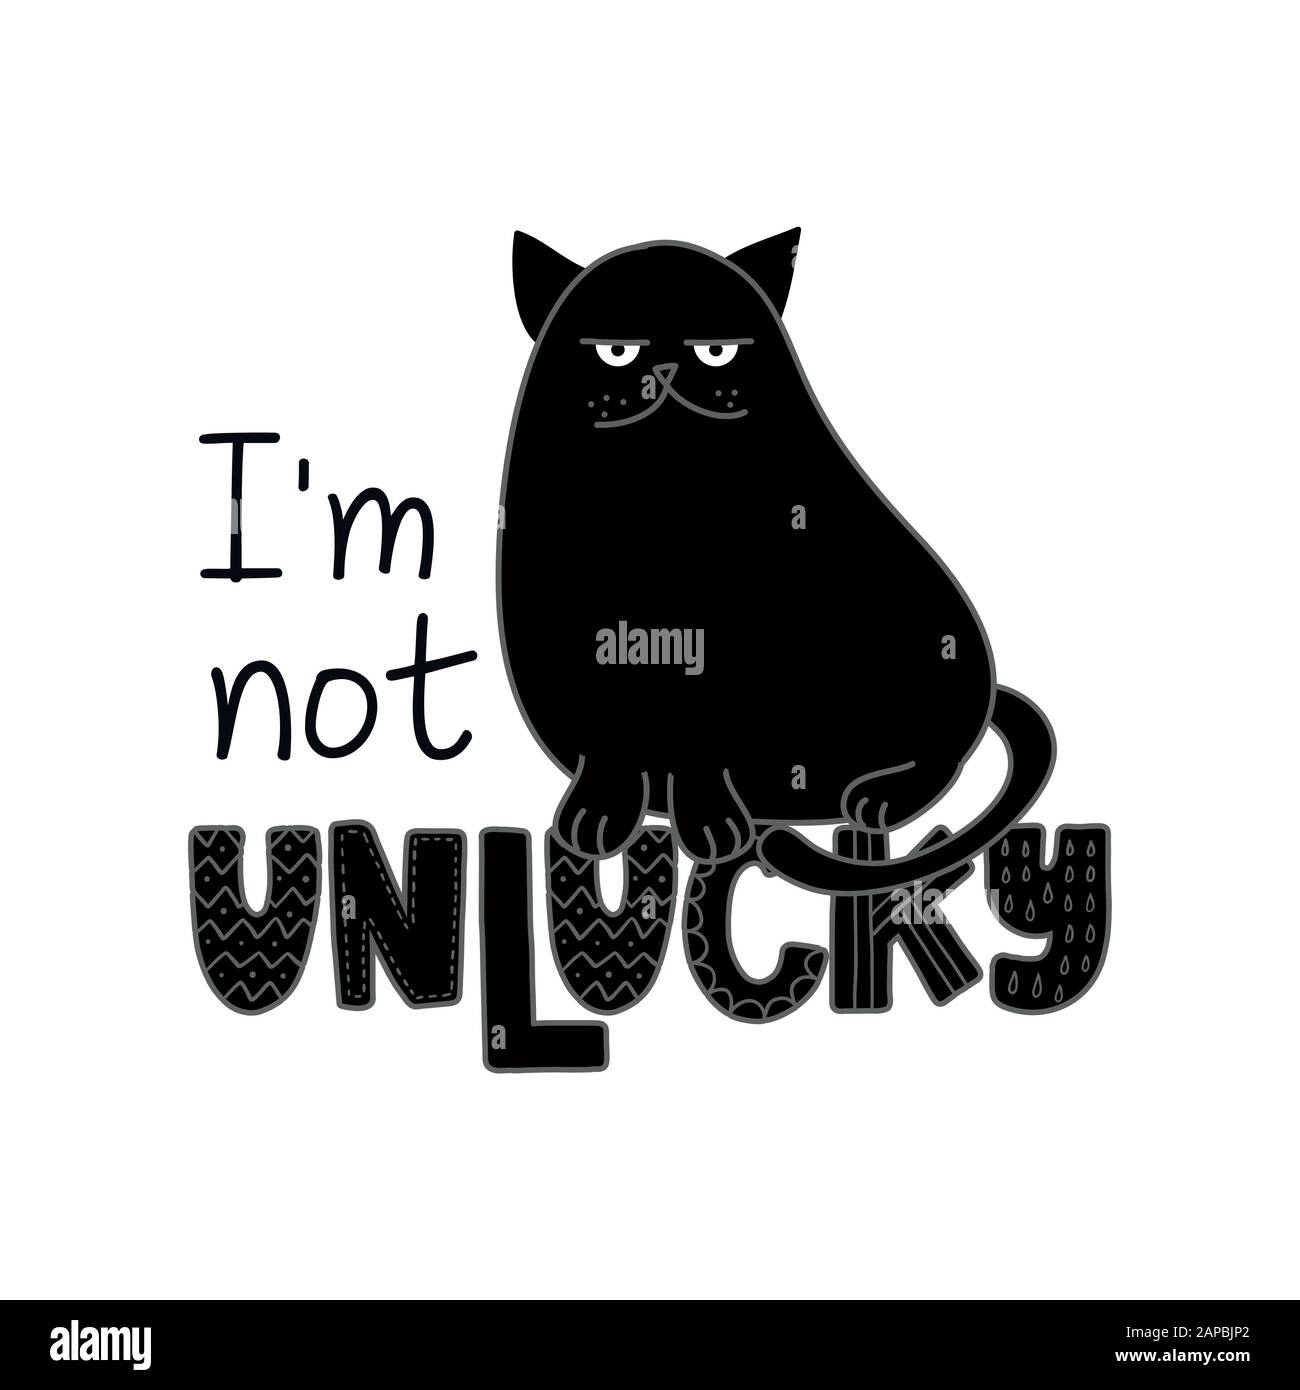 I am not unlucky- funny quote design with grumpy black cat. Kitten calligraphy sign for print. Cute cat poster with lettering, good for t shirts, gift Stock Vector